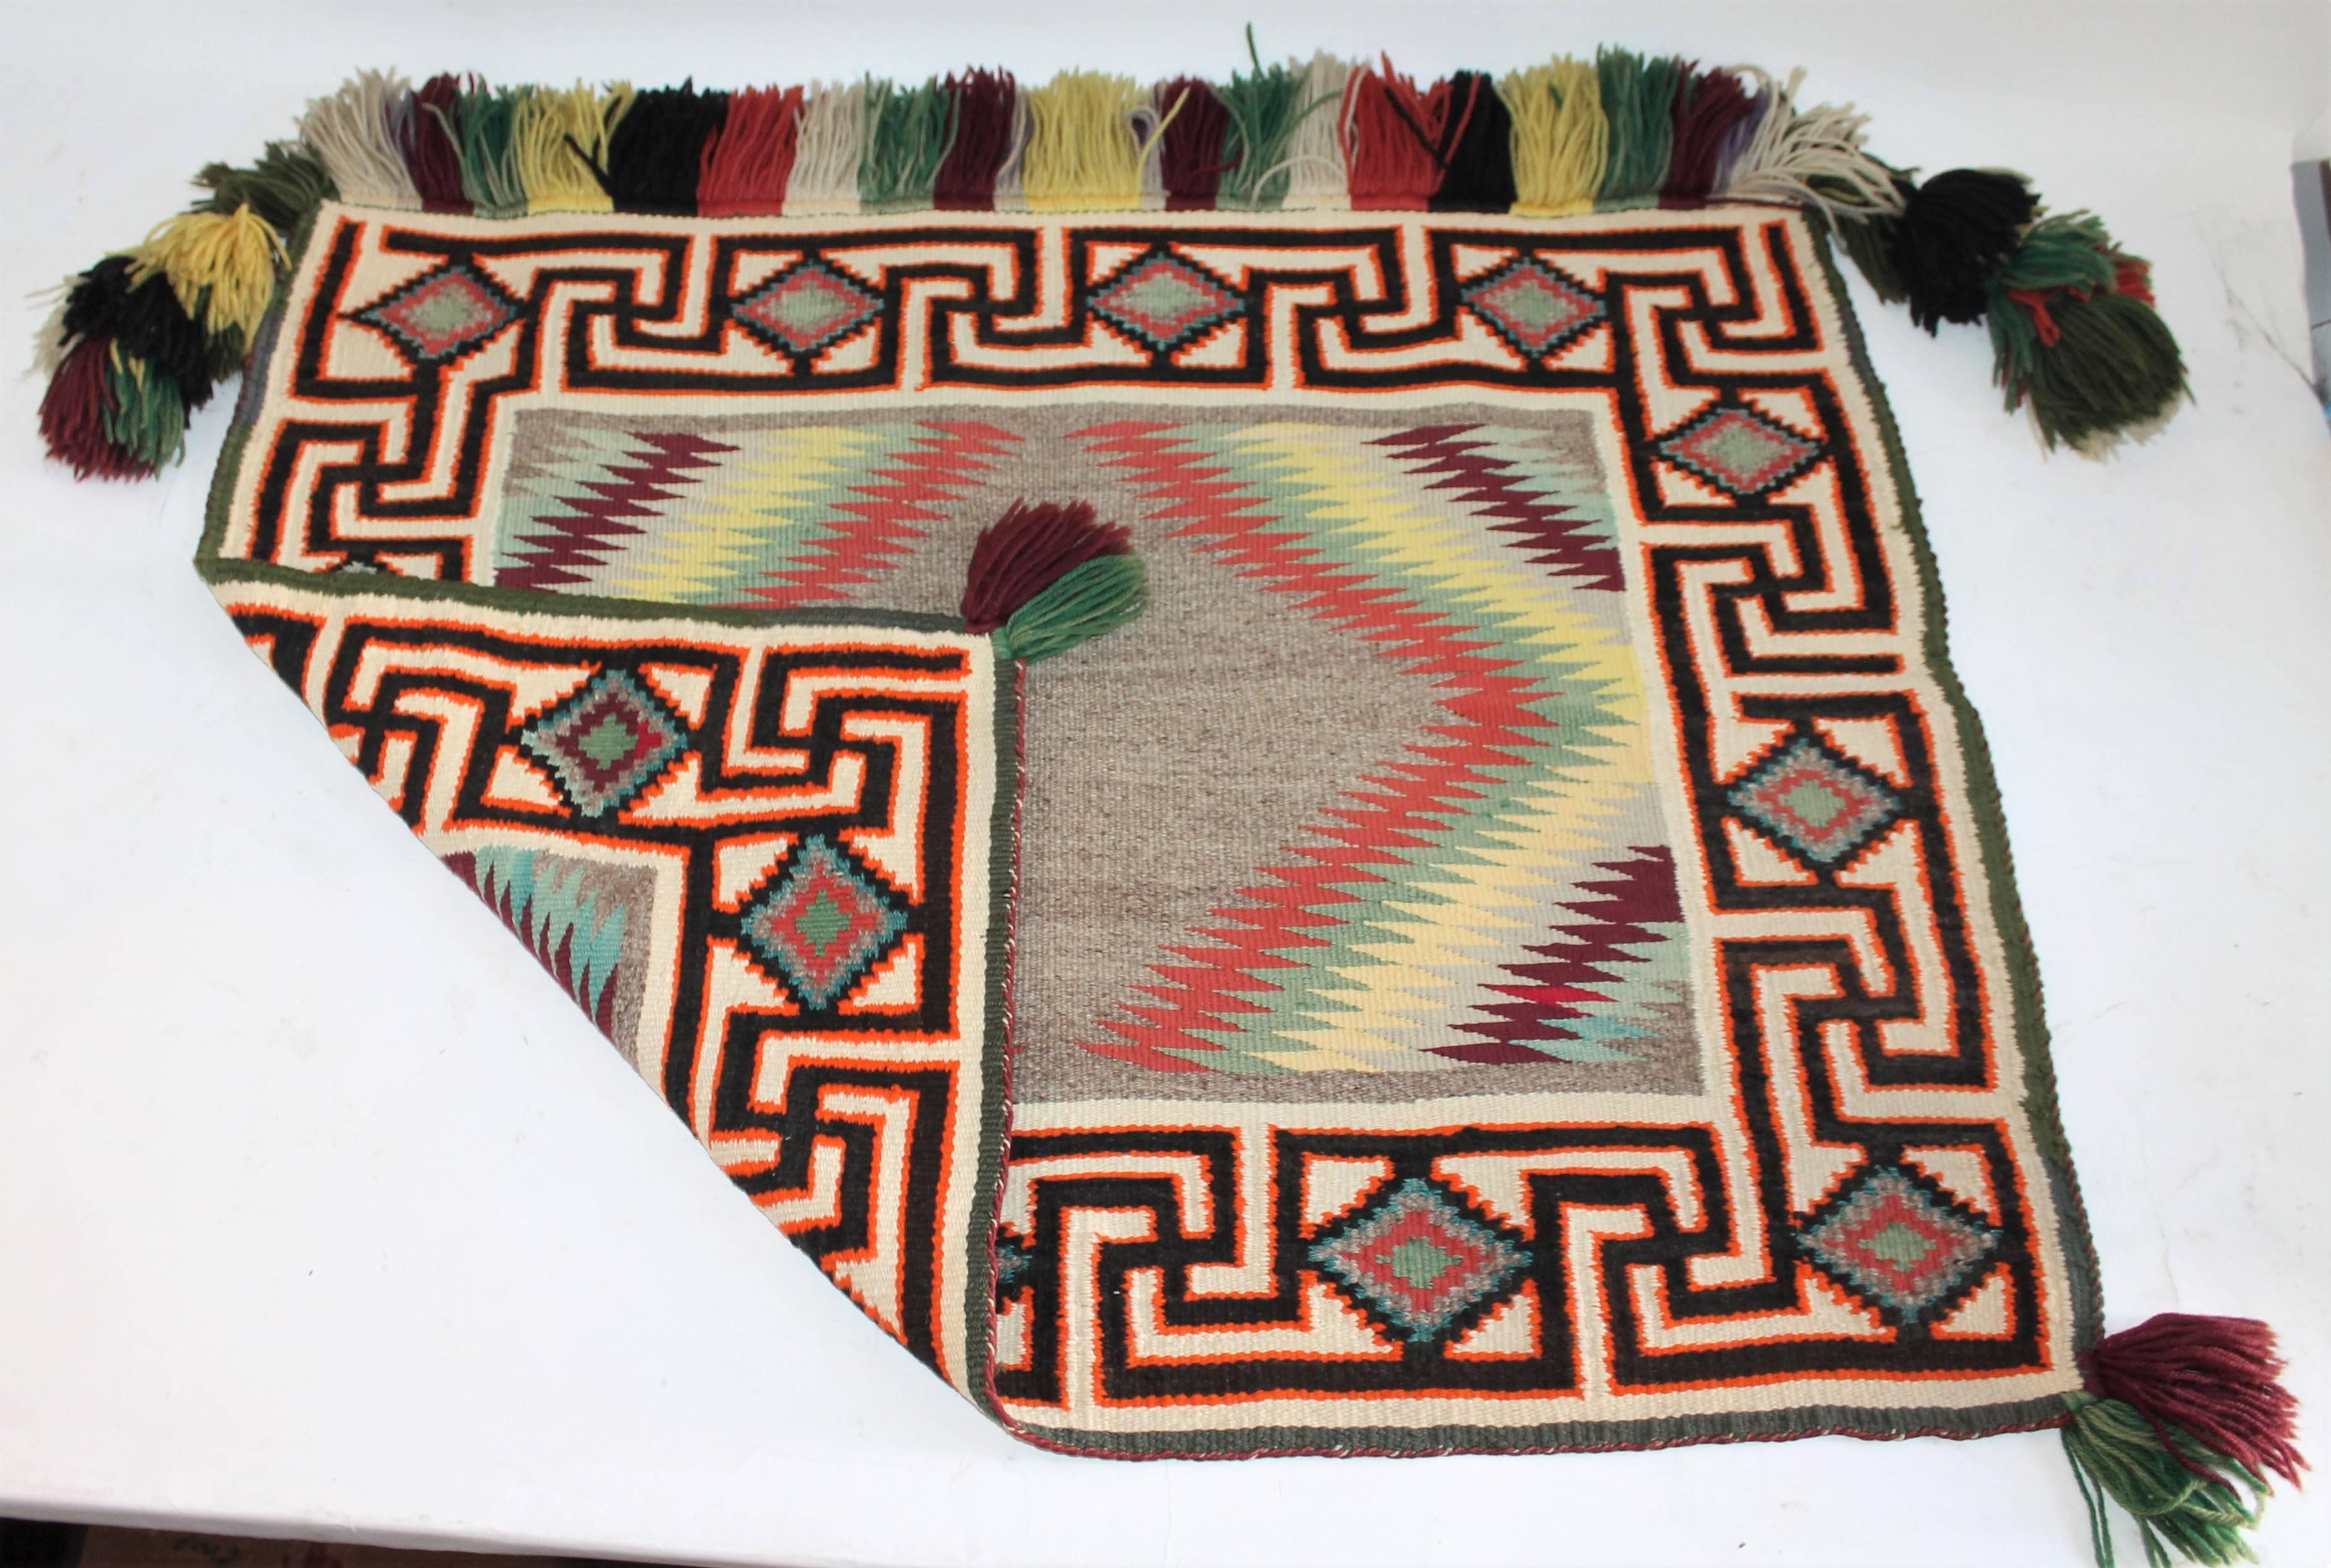 This little gem is a real find. Quite rare with a German town yarn and fringe. This Tess Nos Pos is in pristine as found condition. It is a fancy saddle blanket with all the original fringe.

Measurements are given from fringe to fringe. Height,